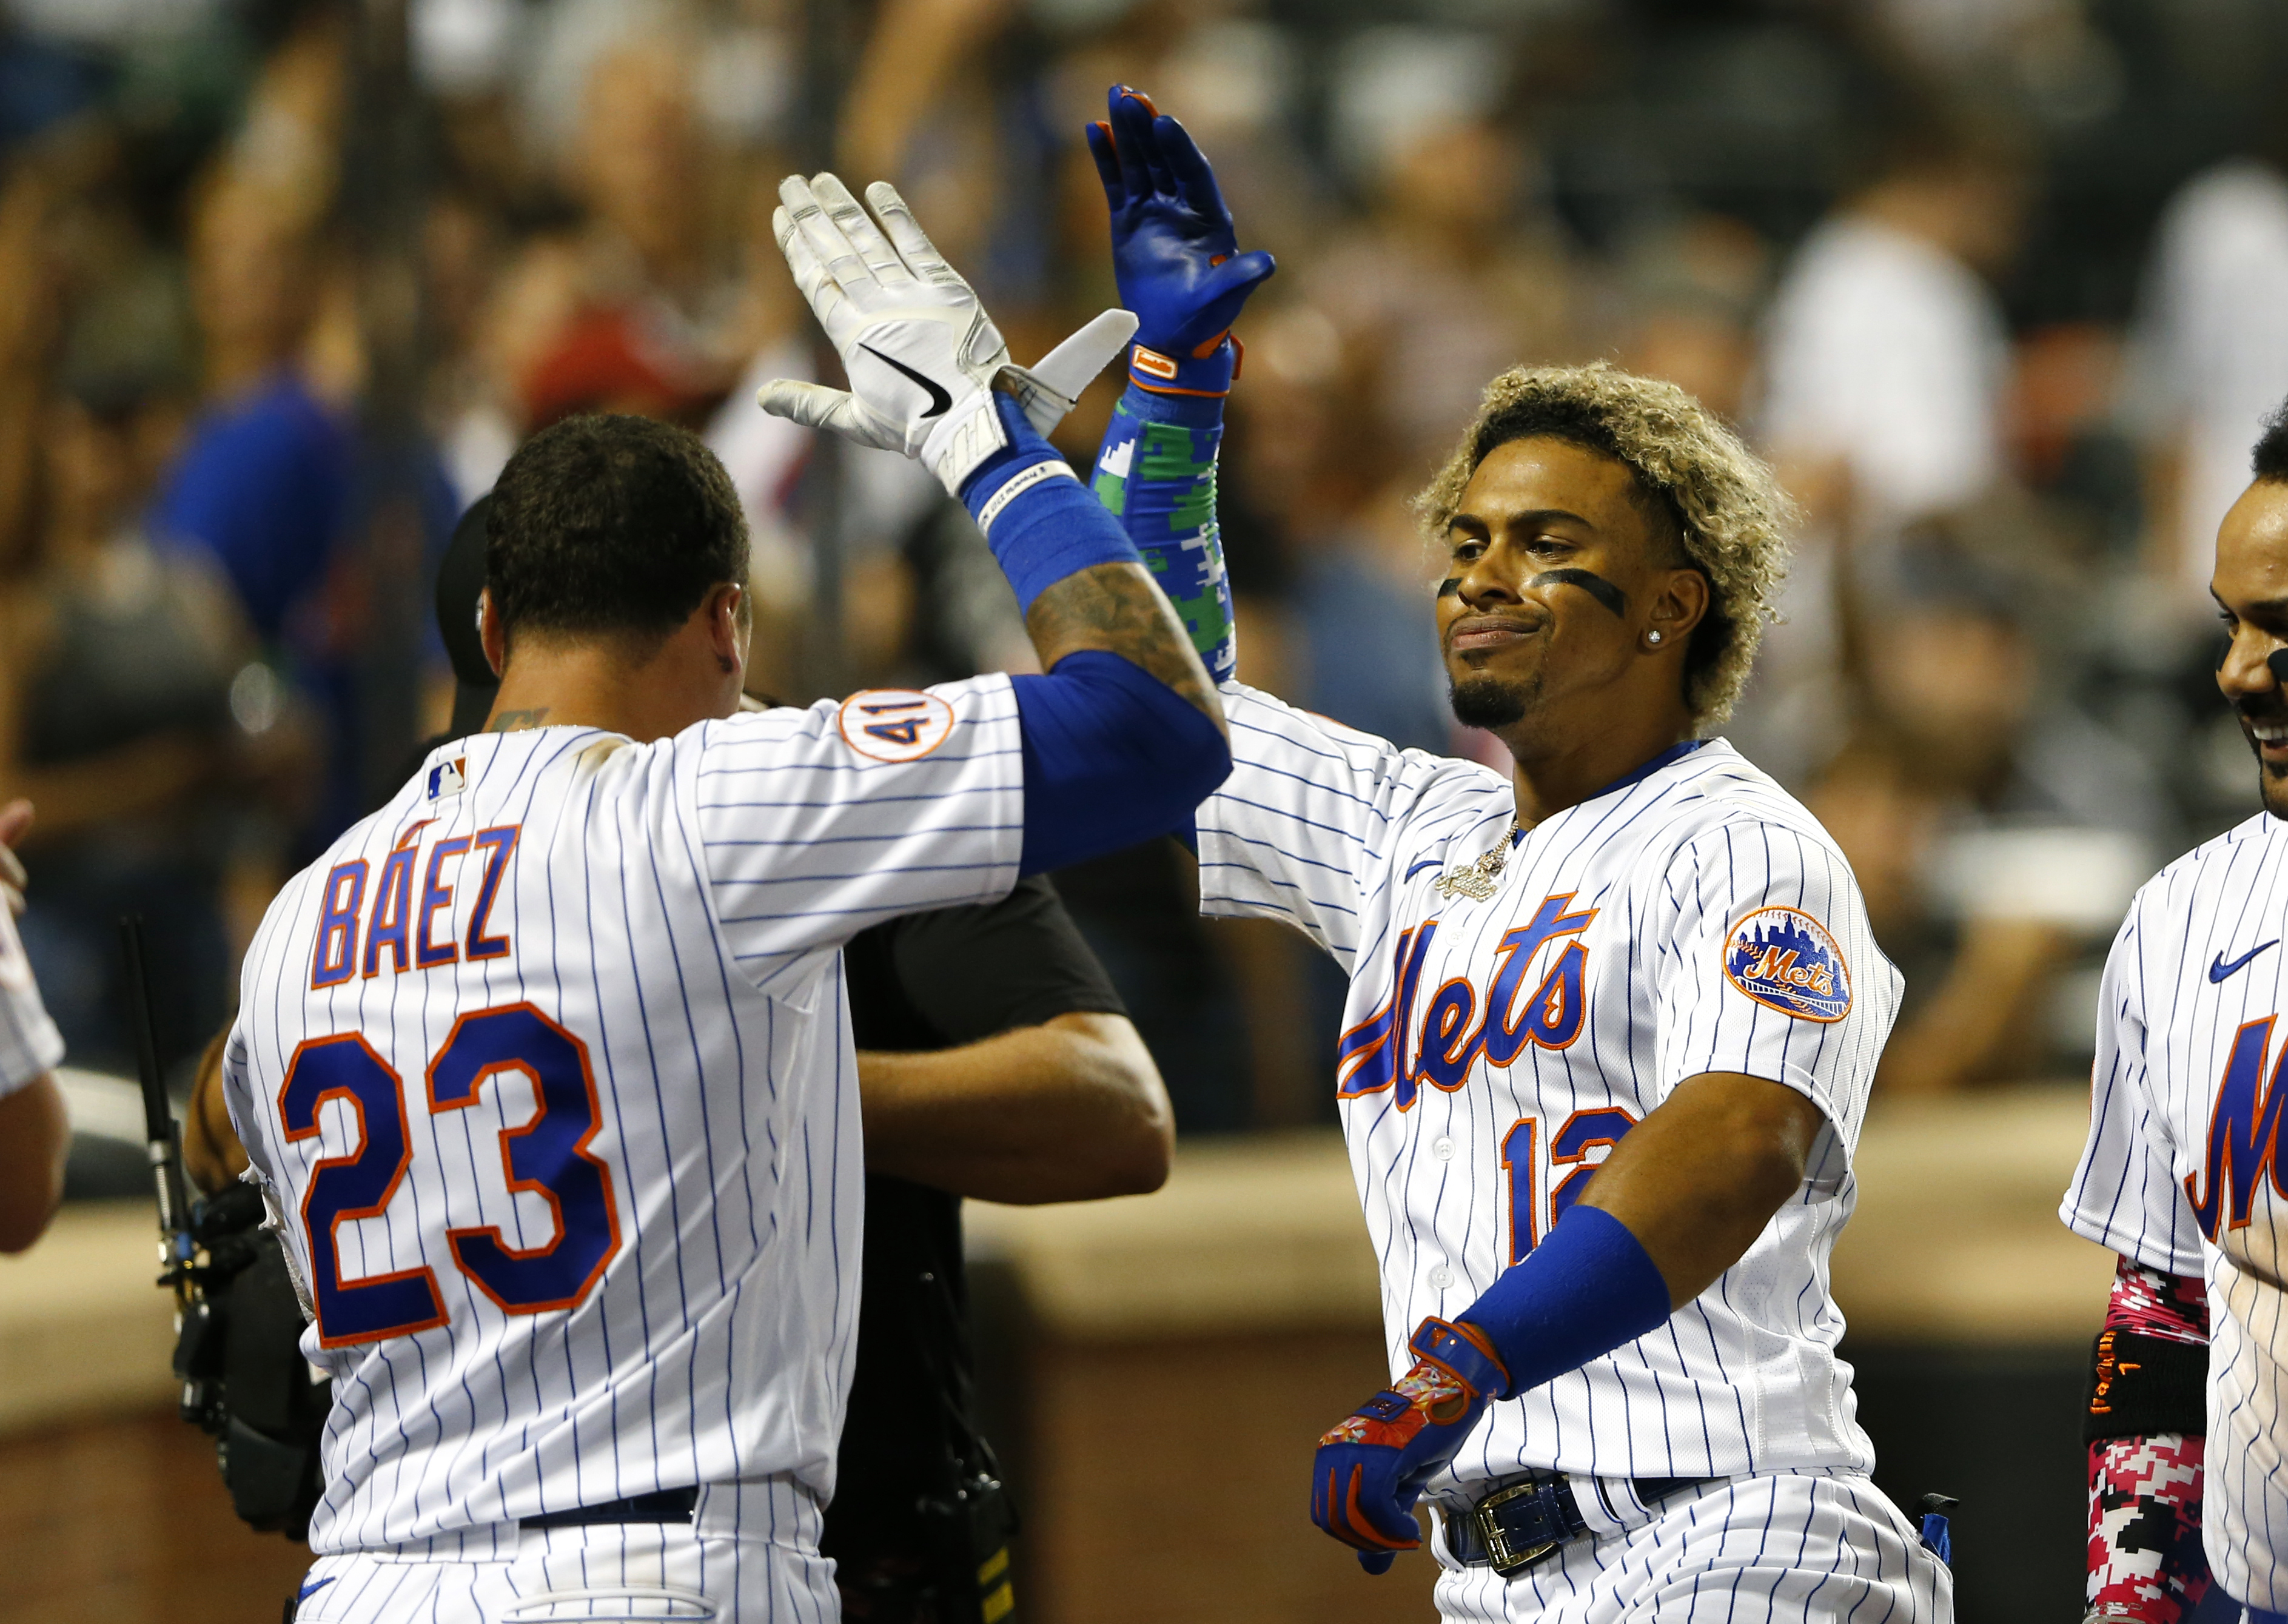 Baez Gives New York Mets Fans Thumbs Down